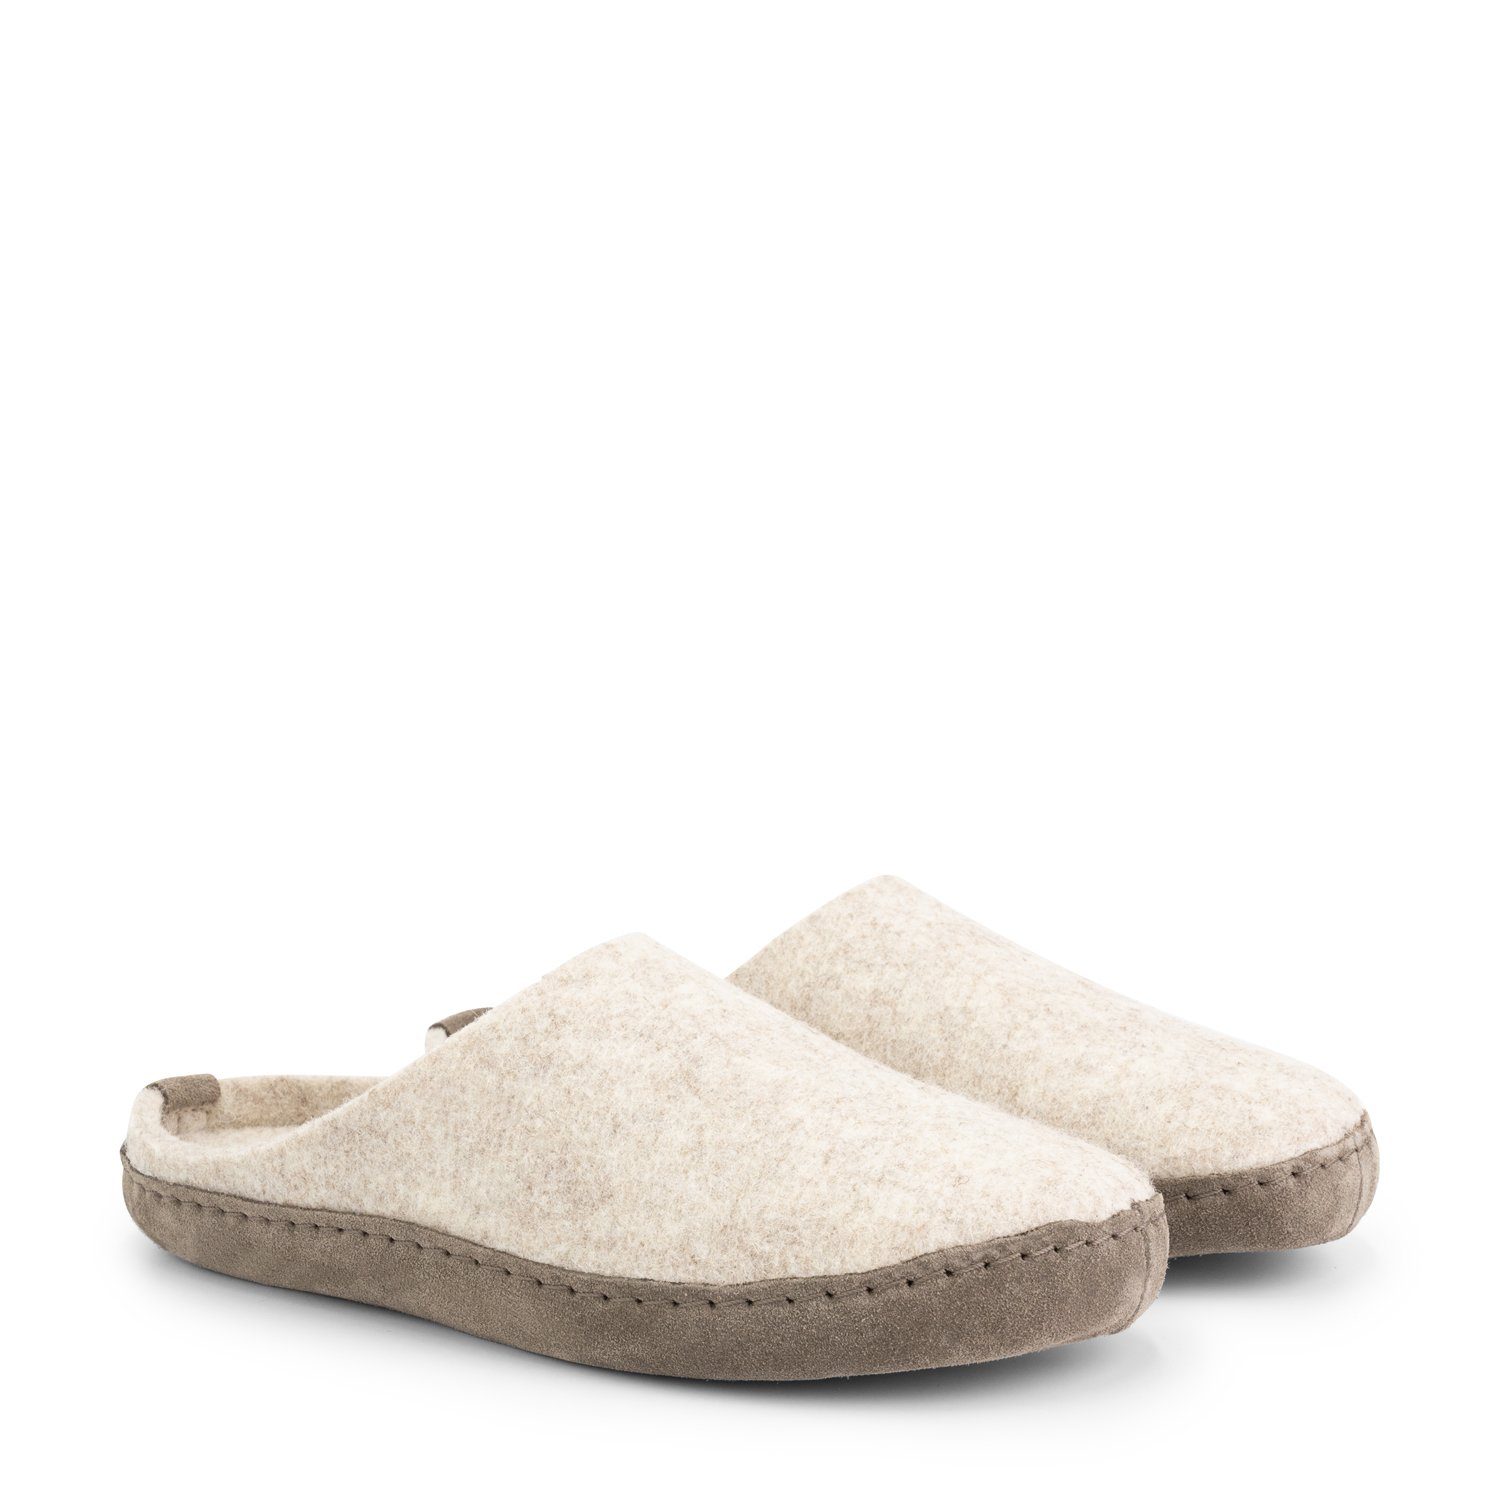 Travelin' Get-Home Lady Hausschuh (Pull-on) mit wolle Sand